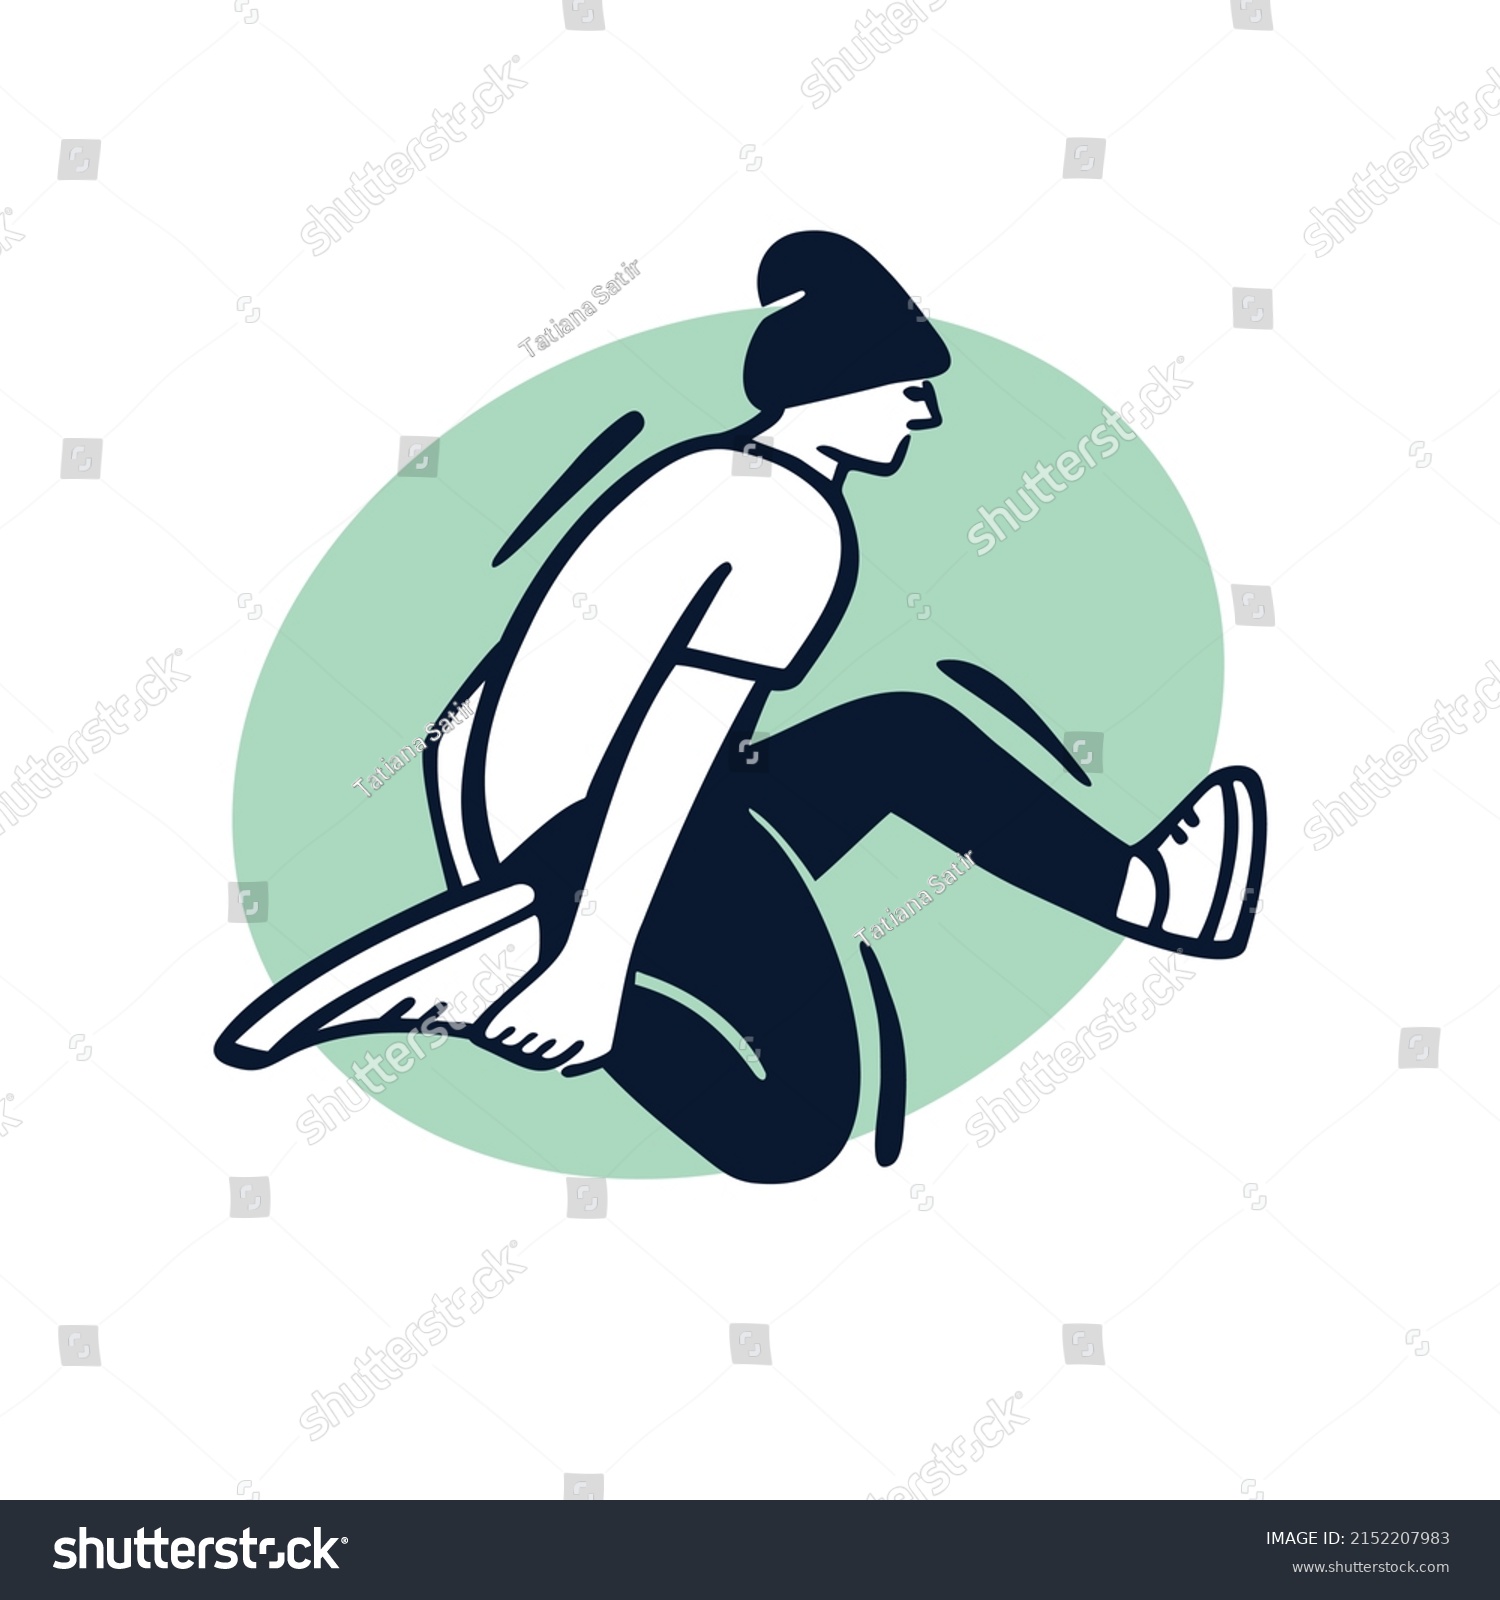 SVG of Break dancer performing stunts. B-boy jumping. Street dance move. Black and white character on green circle background. Sketch style vector design illustrations. svg